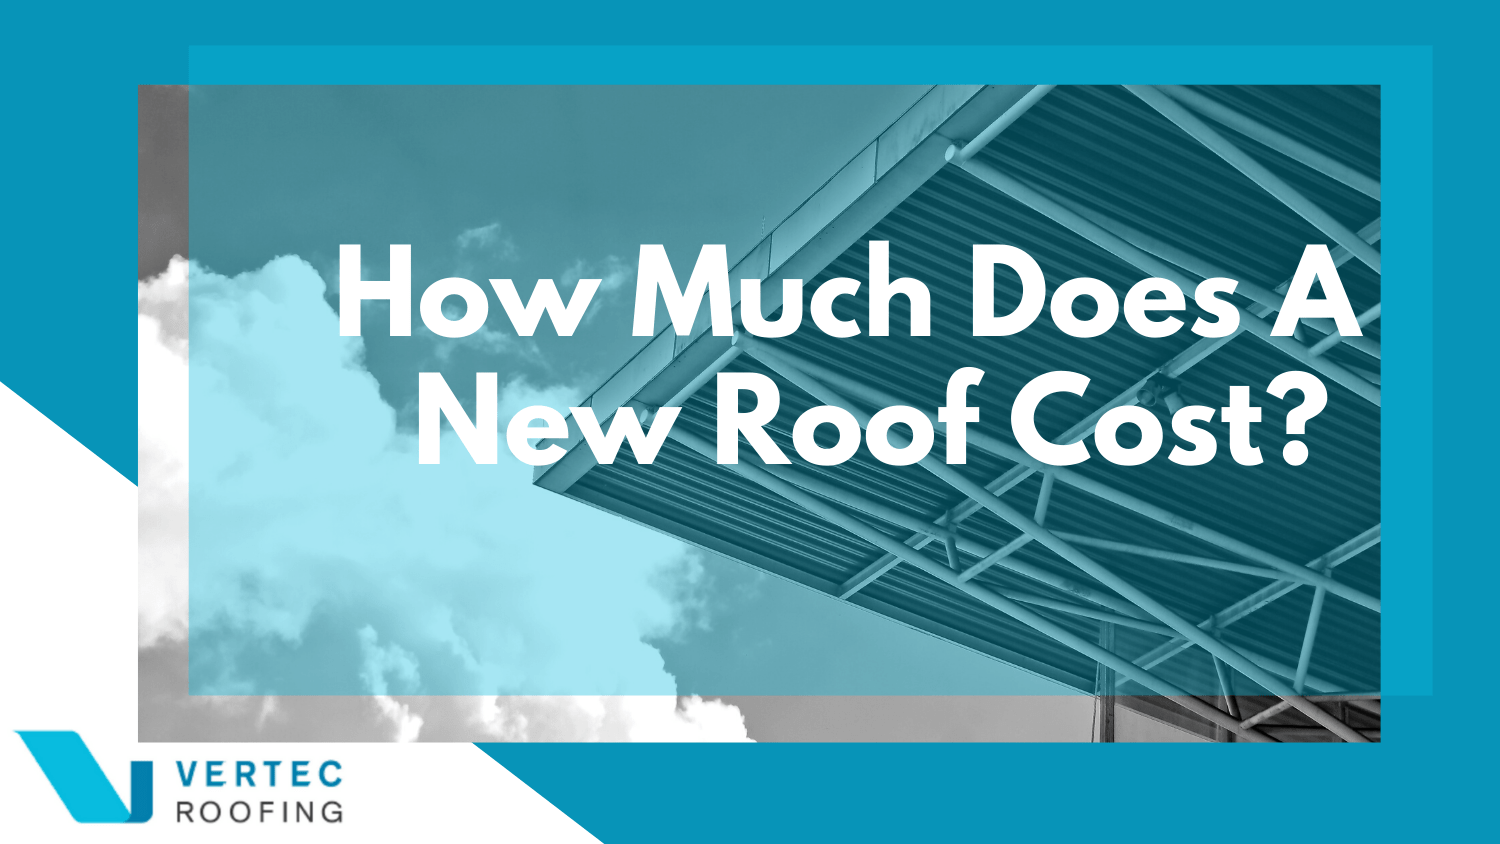 How Much Does A New Roof Cost? Roofing Costs in 2020